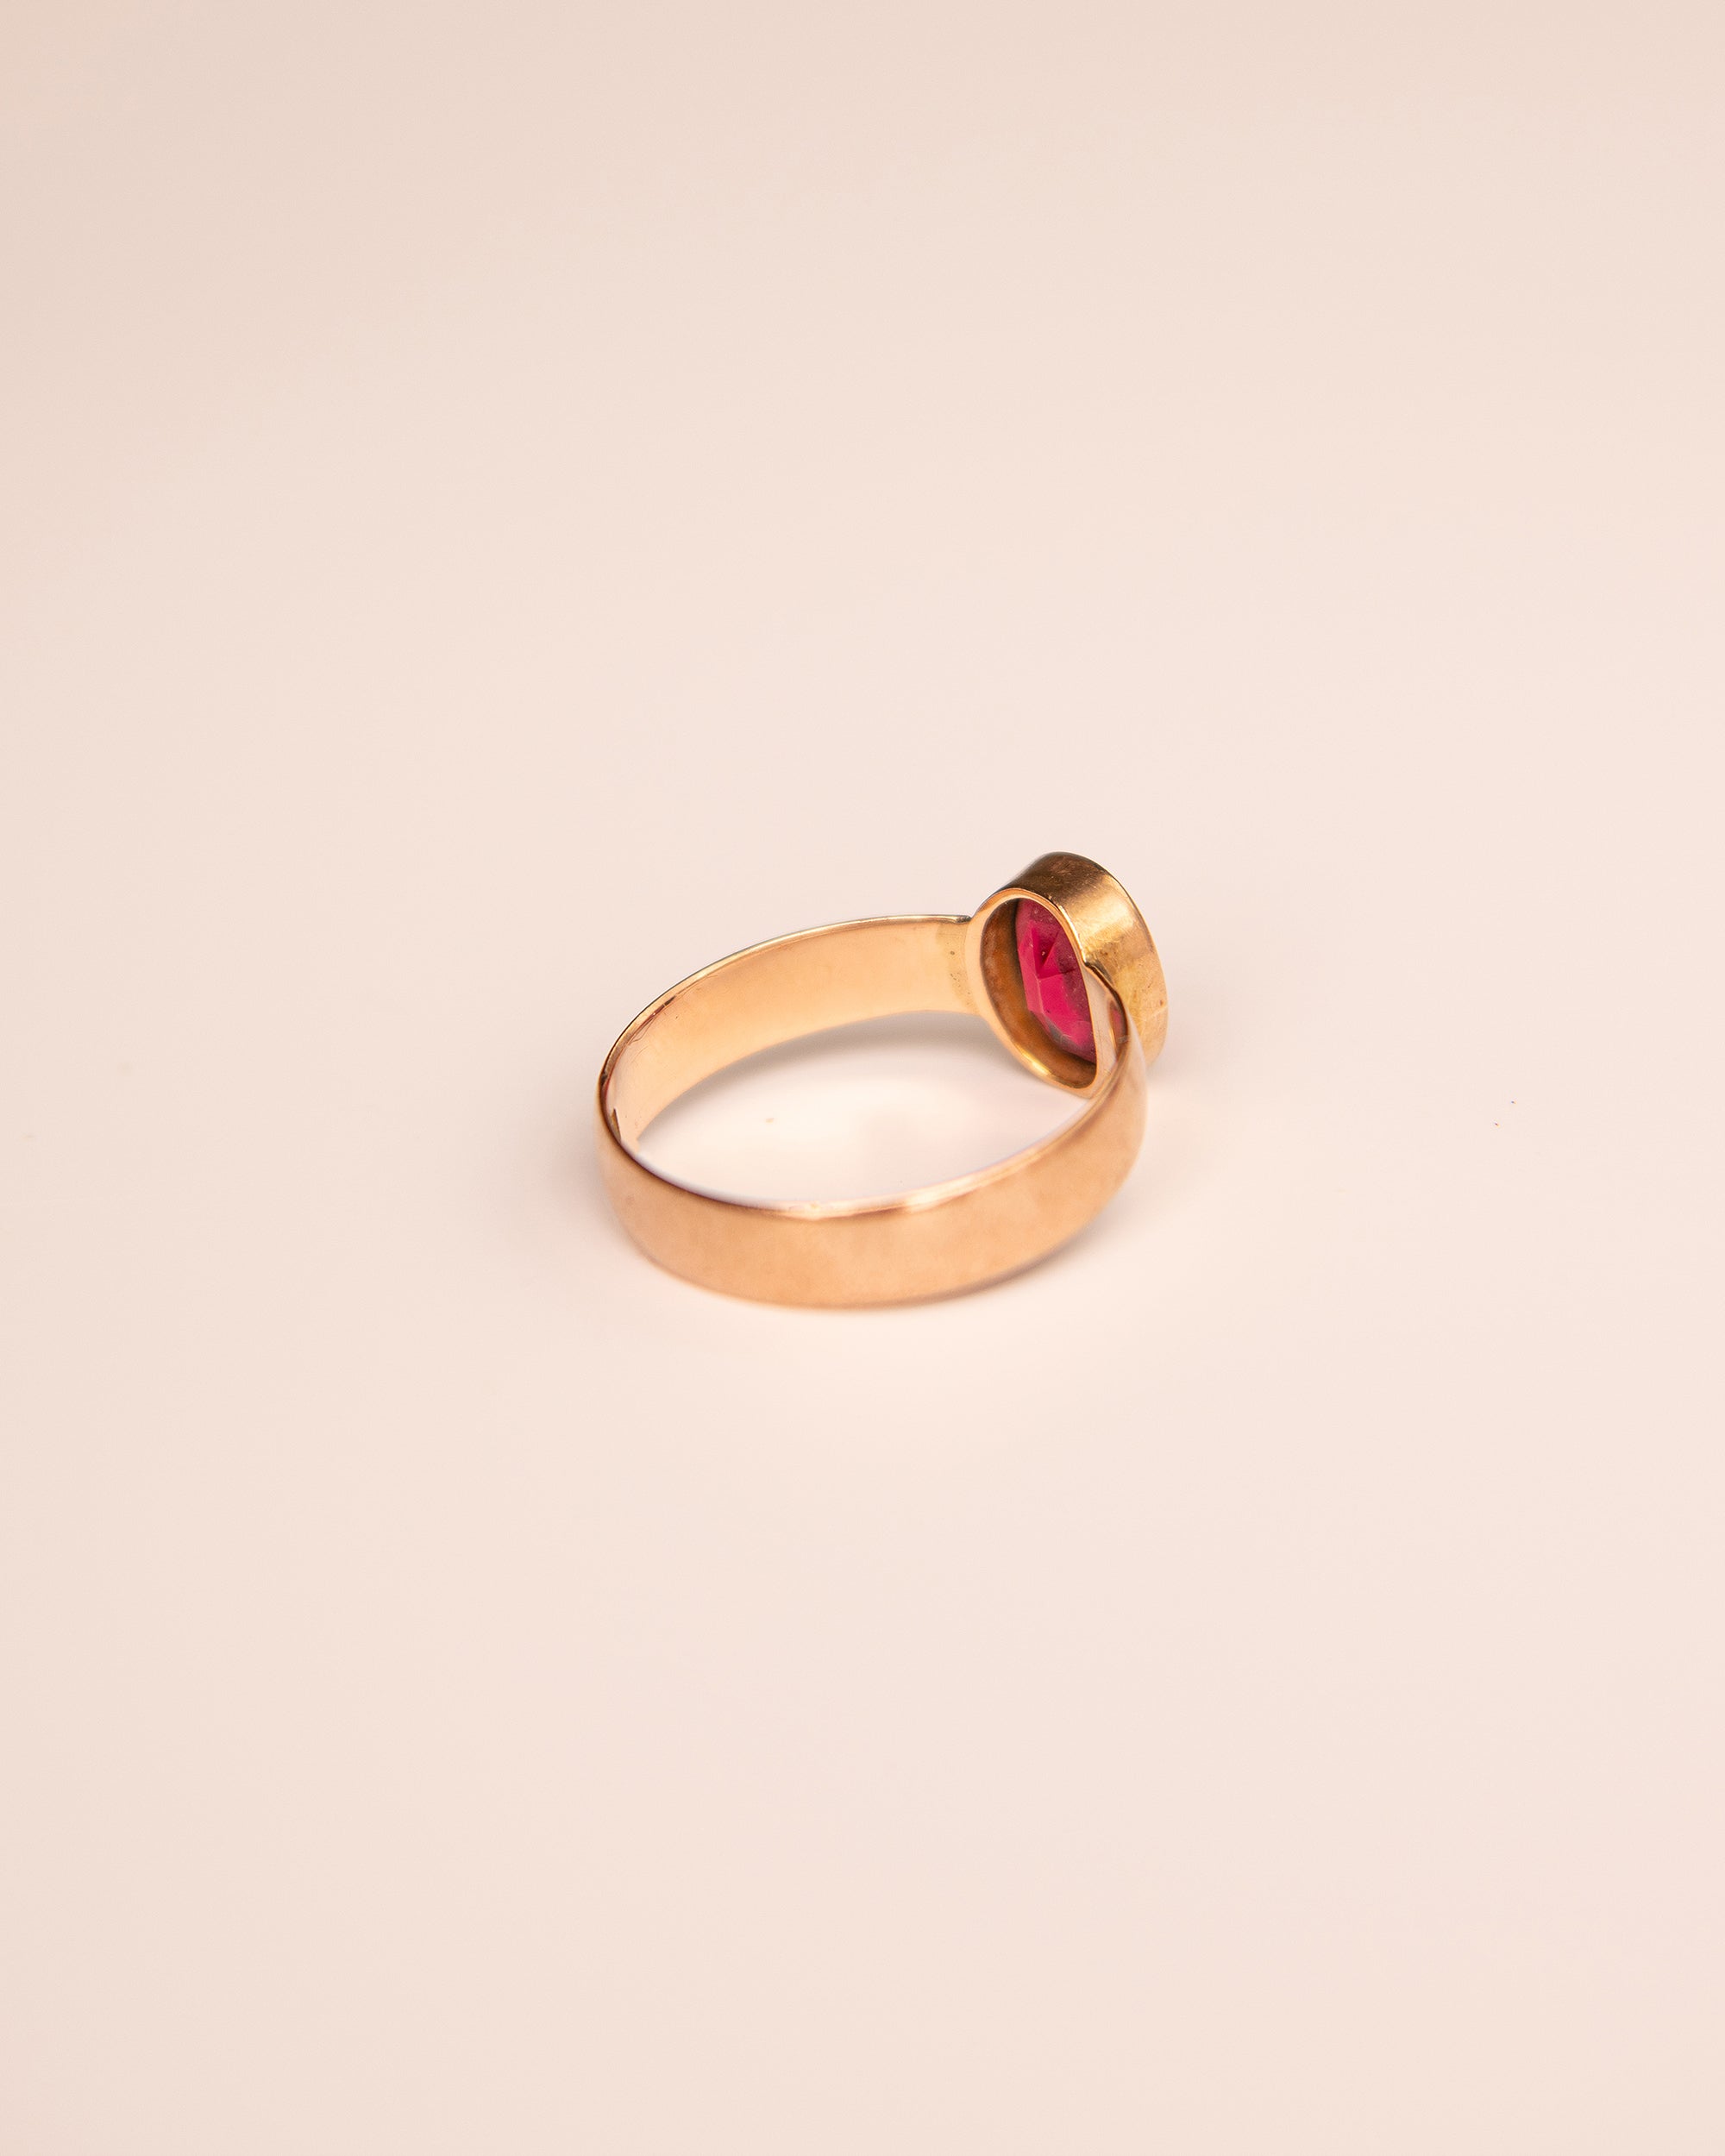 Ophelia 9ct Gold Cocktail Ring